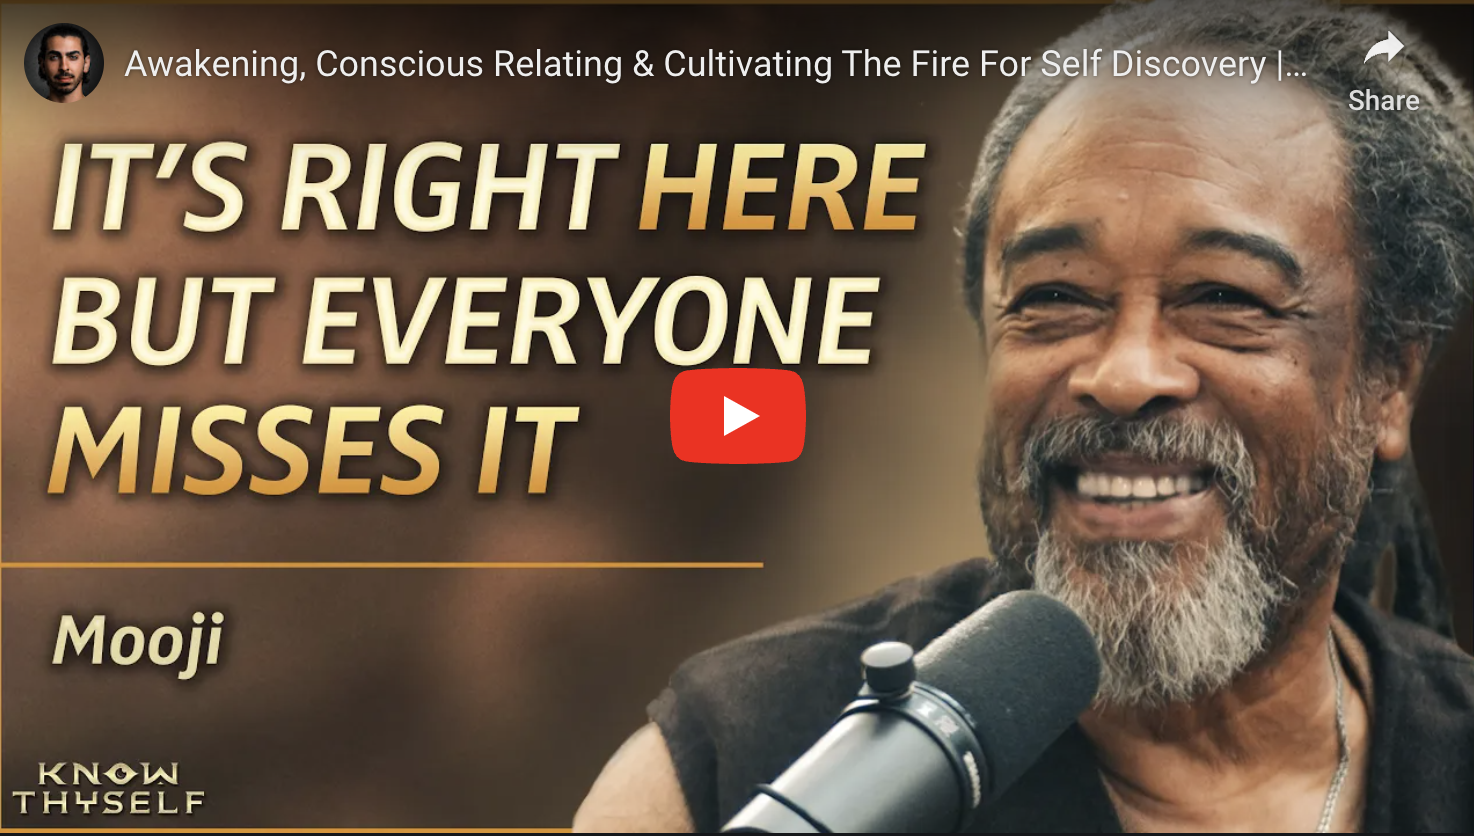 Andre Duqum and Mooji on all things awakening and consciousness